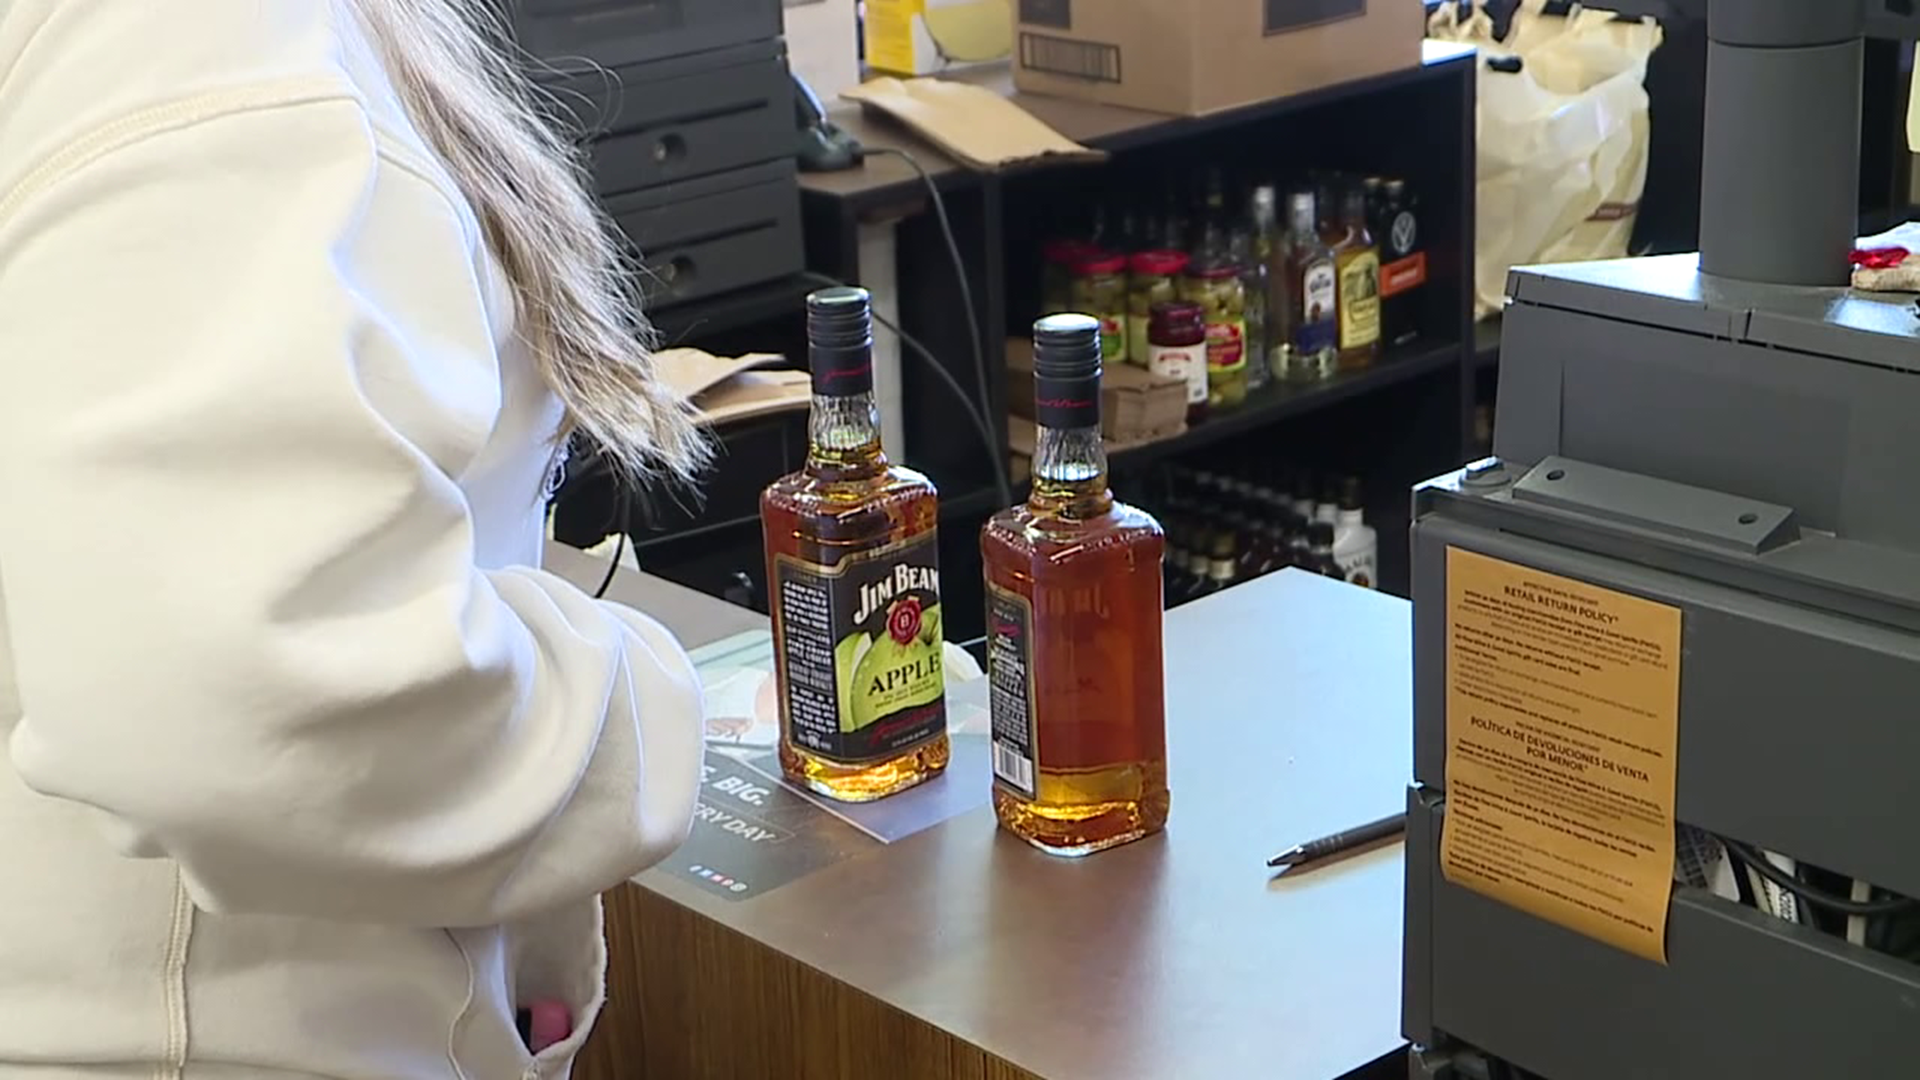 Folks are stocking up after the announcement that state liquor stores are closing.